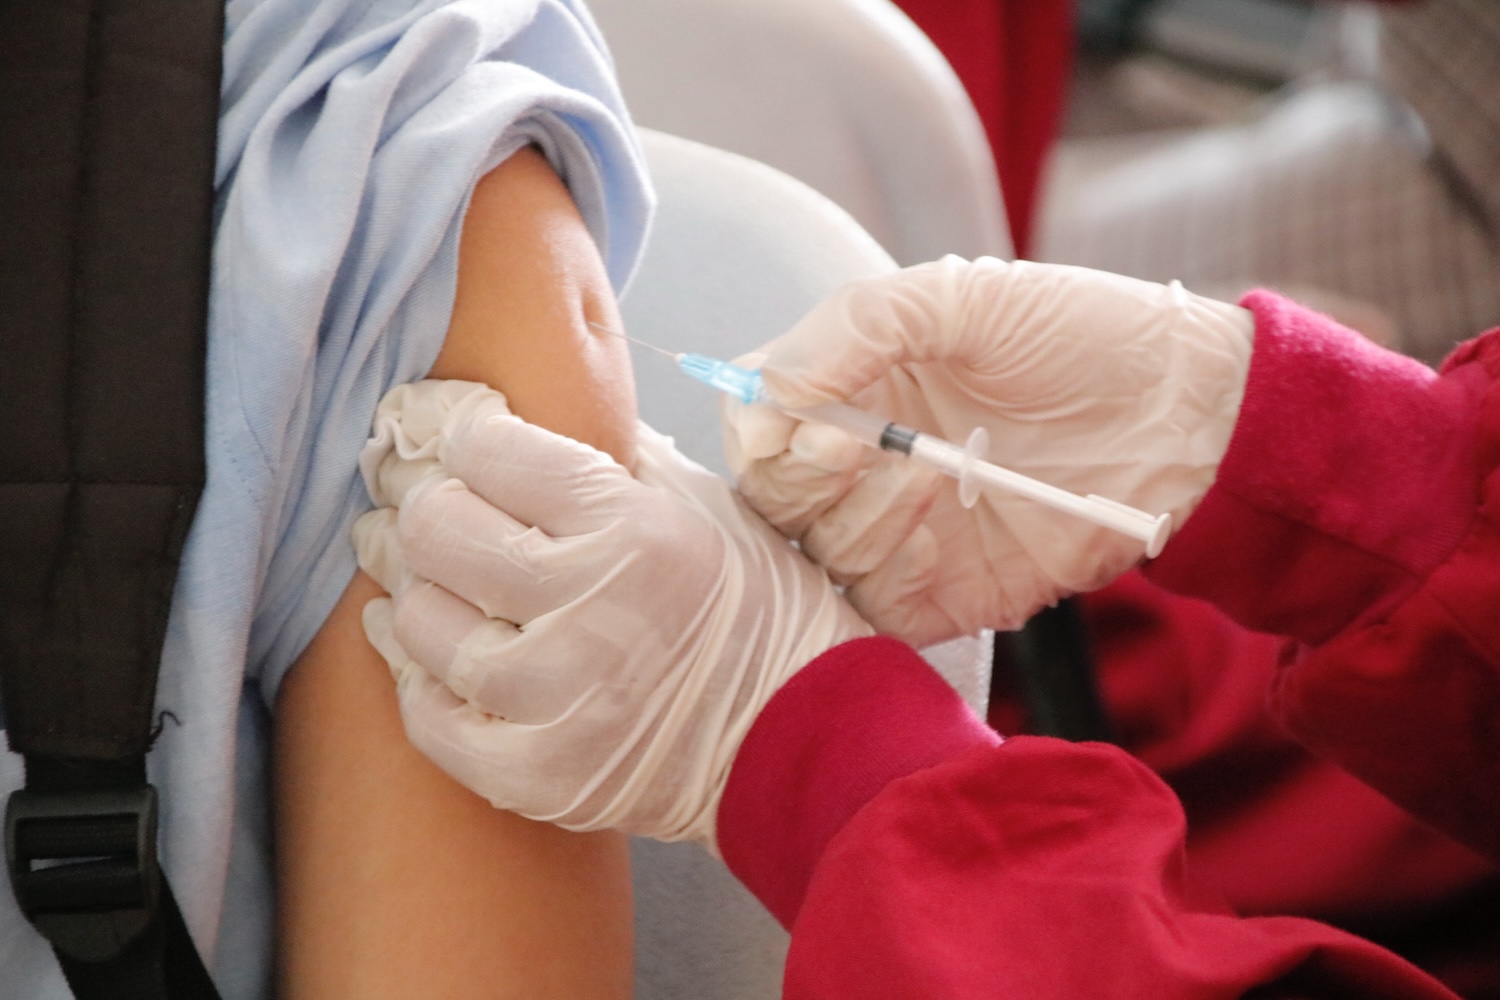 No appointment, no flu vaccination, say health officials